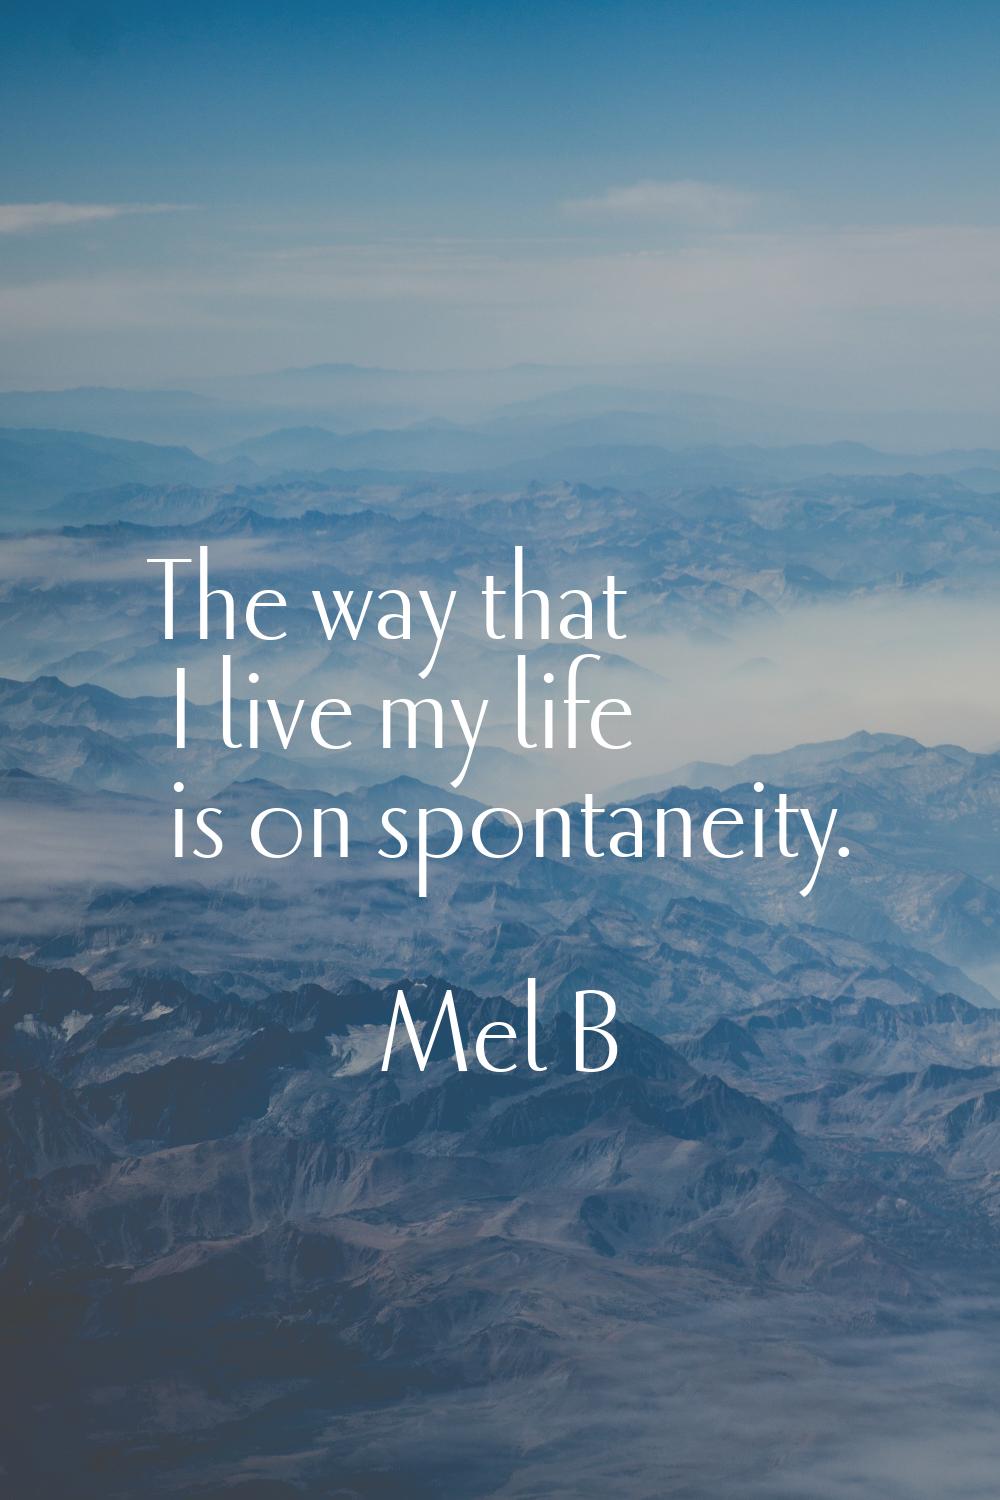 The way that I live my life is on spontaneity.